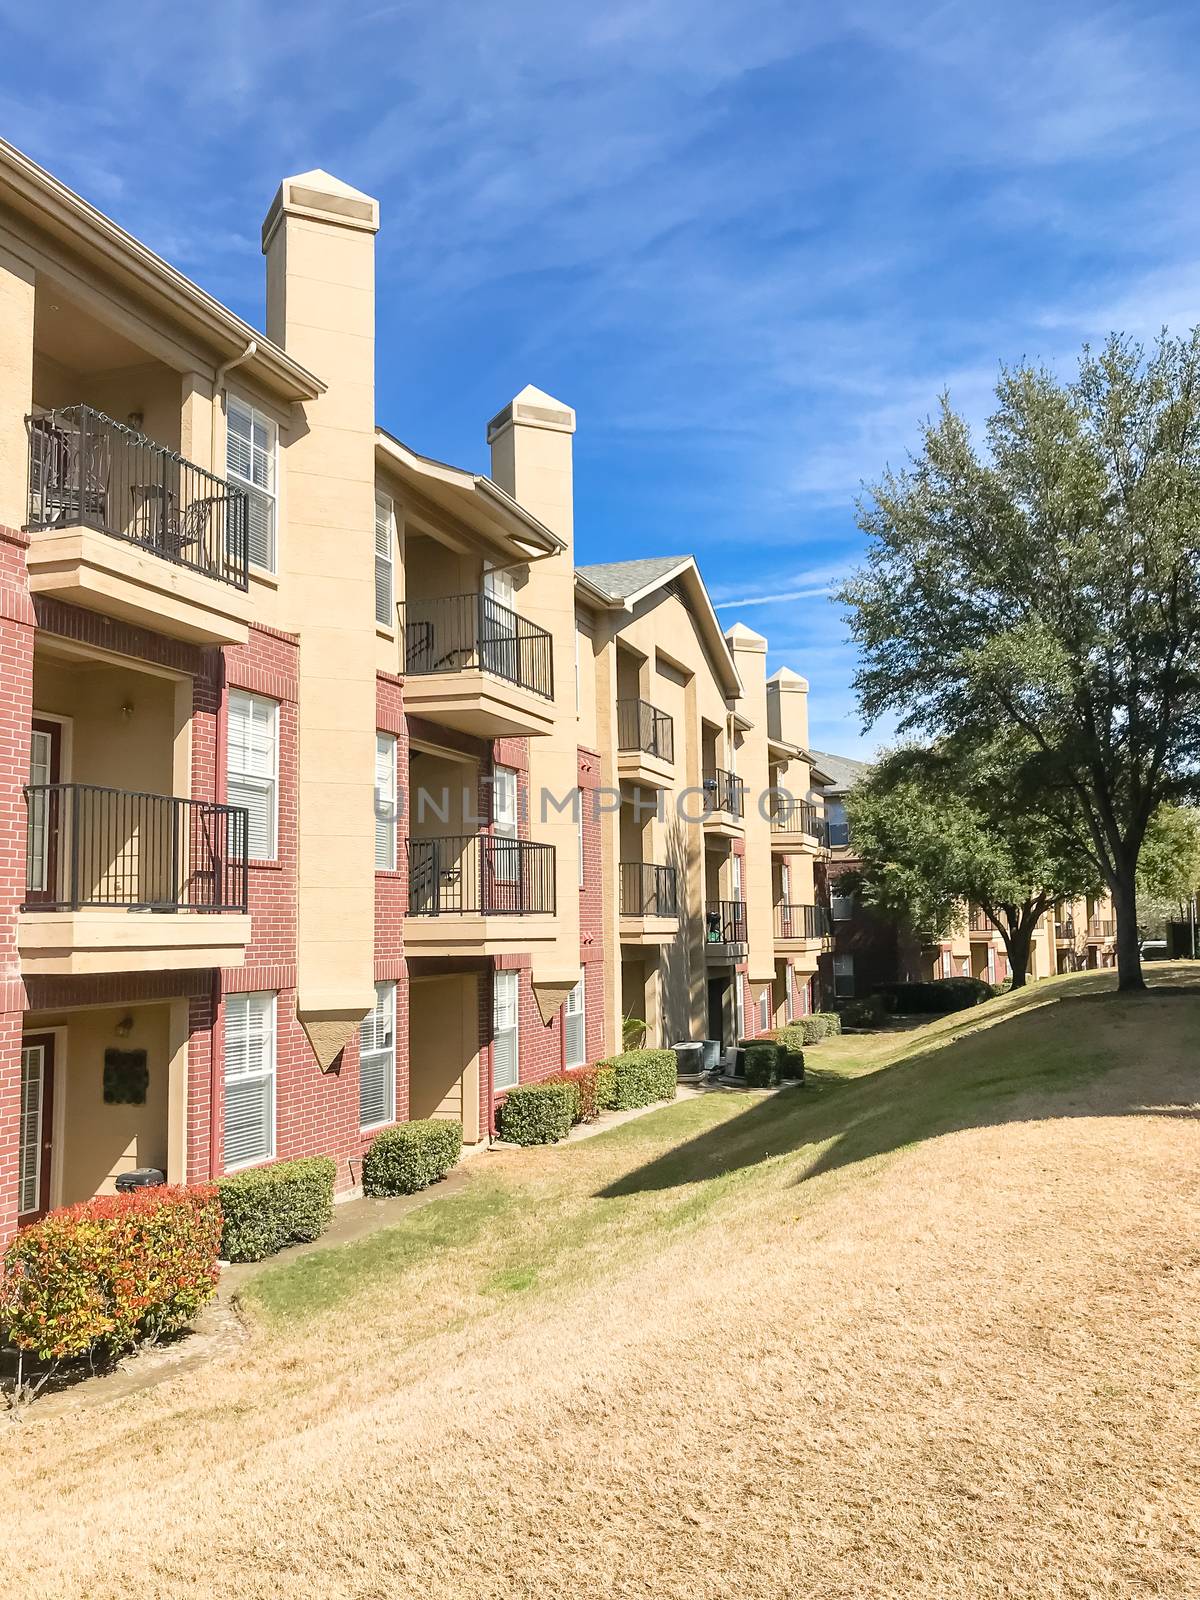 Typical apartment complex building with hillside backyard in Lewisville, Texas, USA. Sunny spring day with blue sky and white clouds over high chimney